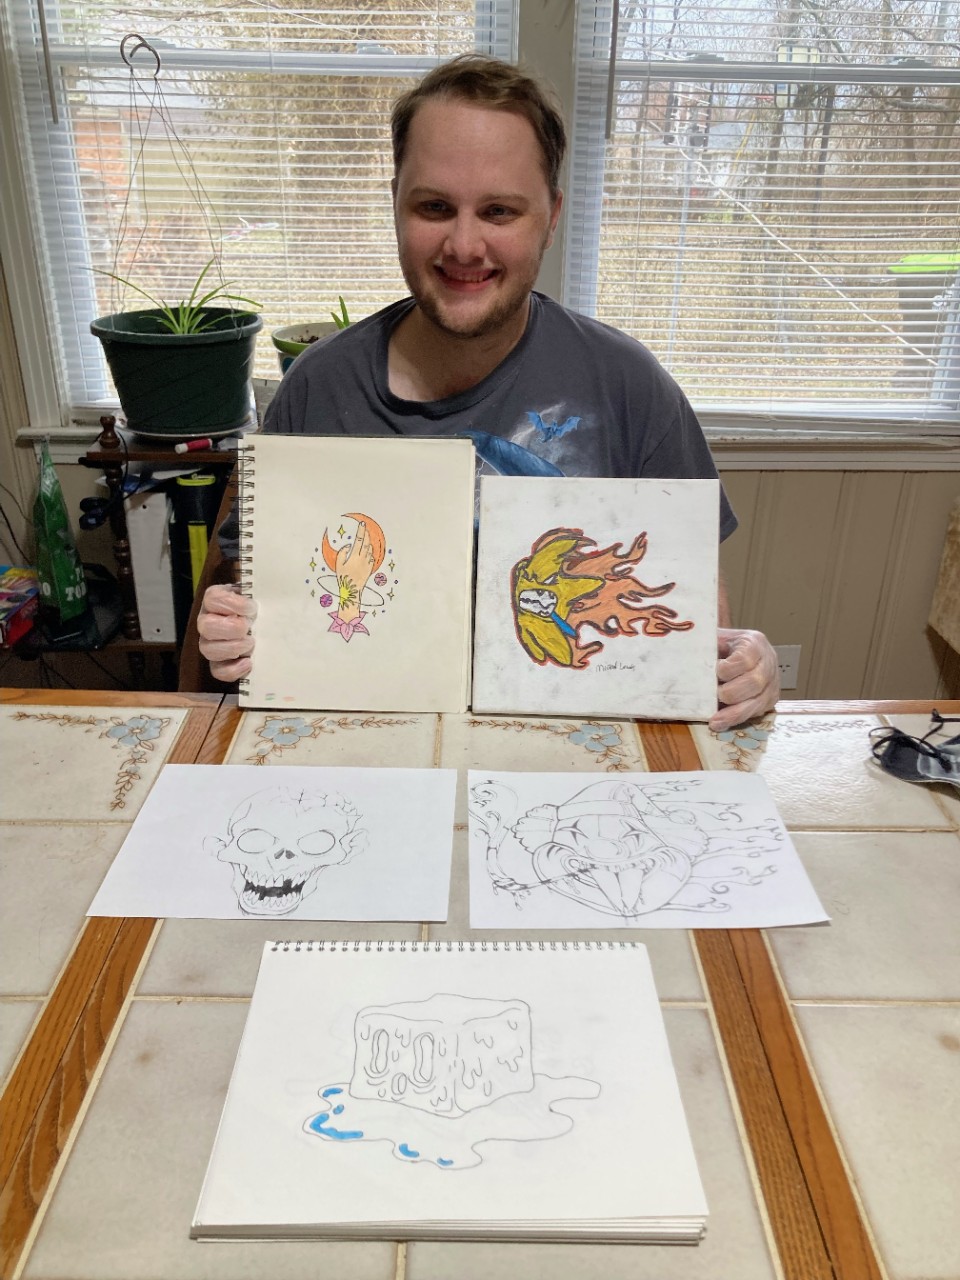 a young white man smiling, holding up a couple of detailed colored sketches and sitting at a table covered in pencil sketches. the sketches on the table include a clown, a melting cube of ice and a skull.